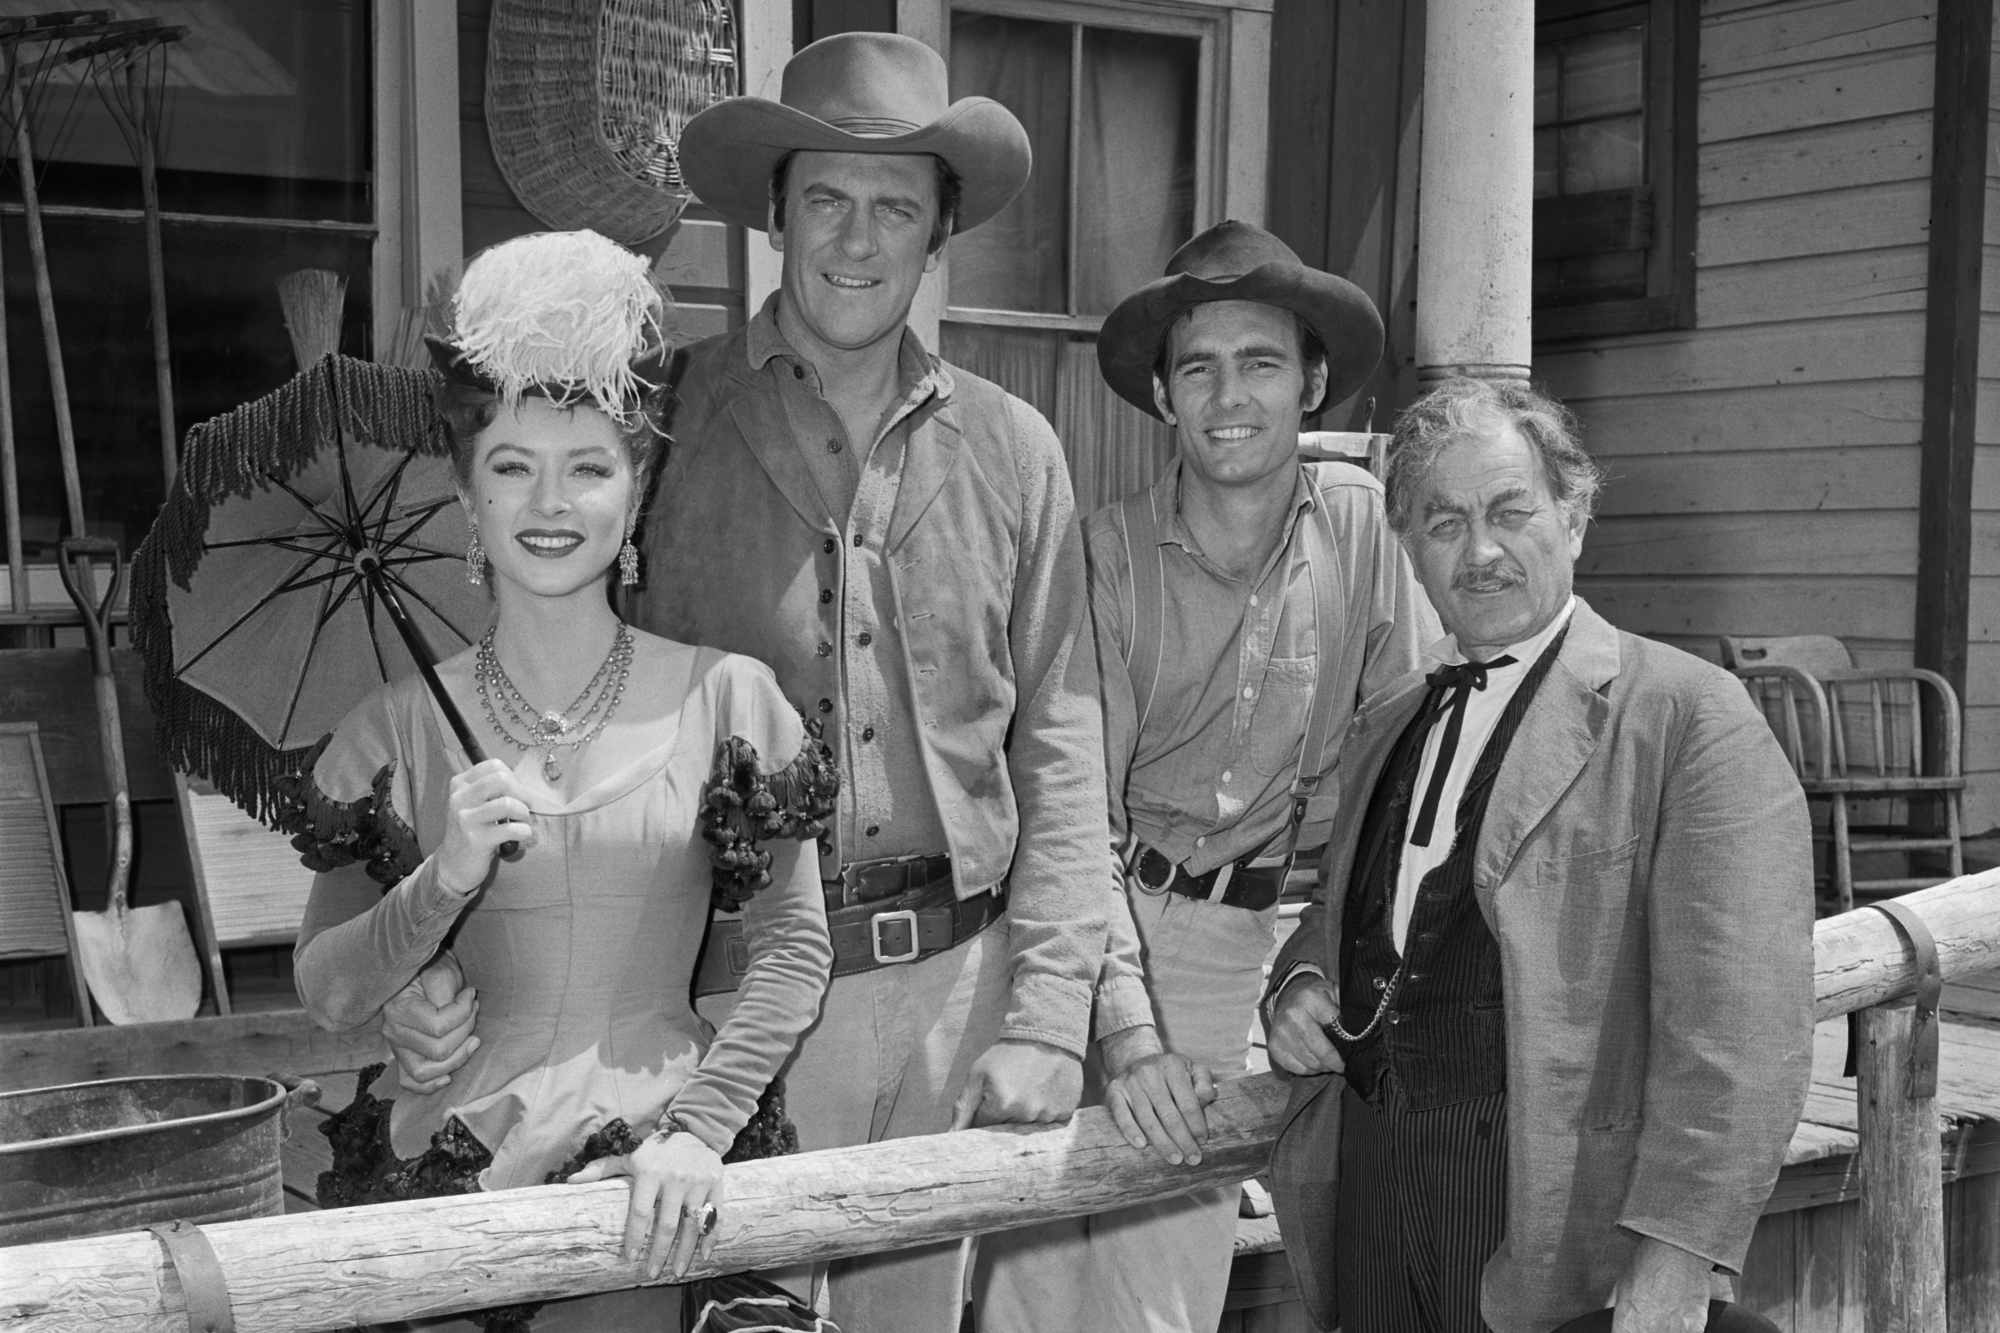 'Gunsmoke' Amanda Blake as Kitty Russell, James Arness as Marshal Matt Dillon, Dennis Weaver as Chester Goode and Milburn Stone as Dr. Galen 'Doc' Adams smiling in Western costumes with their hands resting on a fence beam